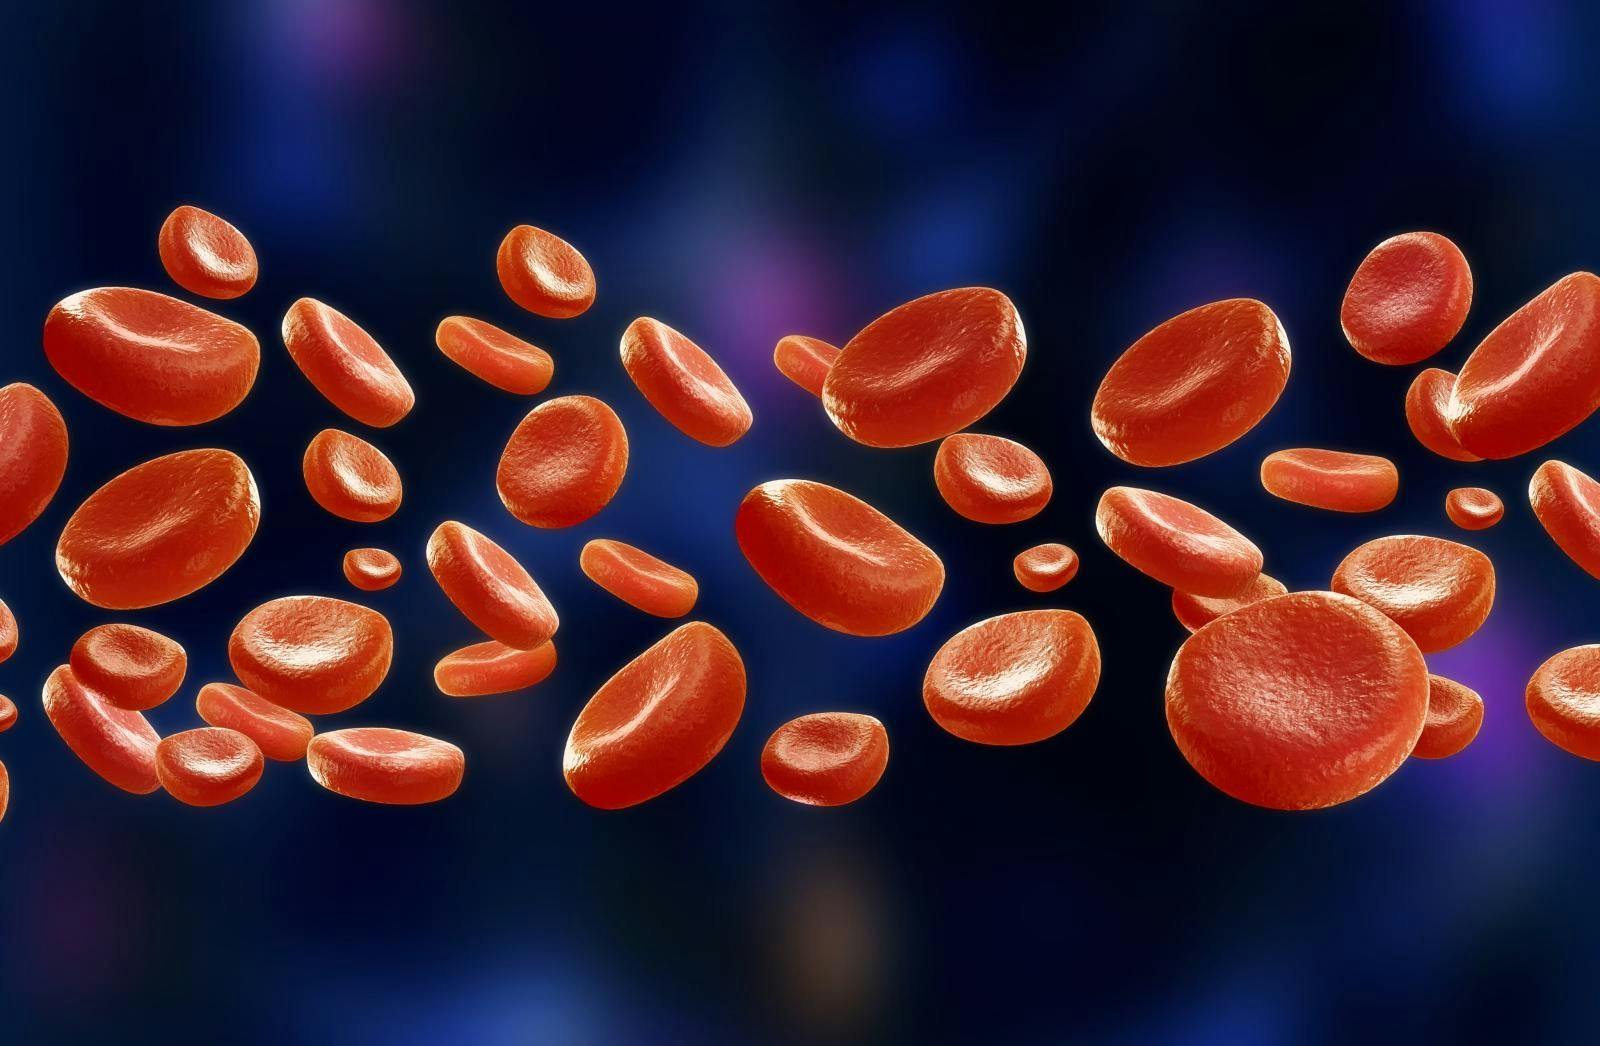 Peter Turecek, PhD, Explains How Medical Devices May Benefit Patients with Hemophilia